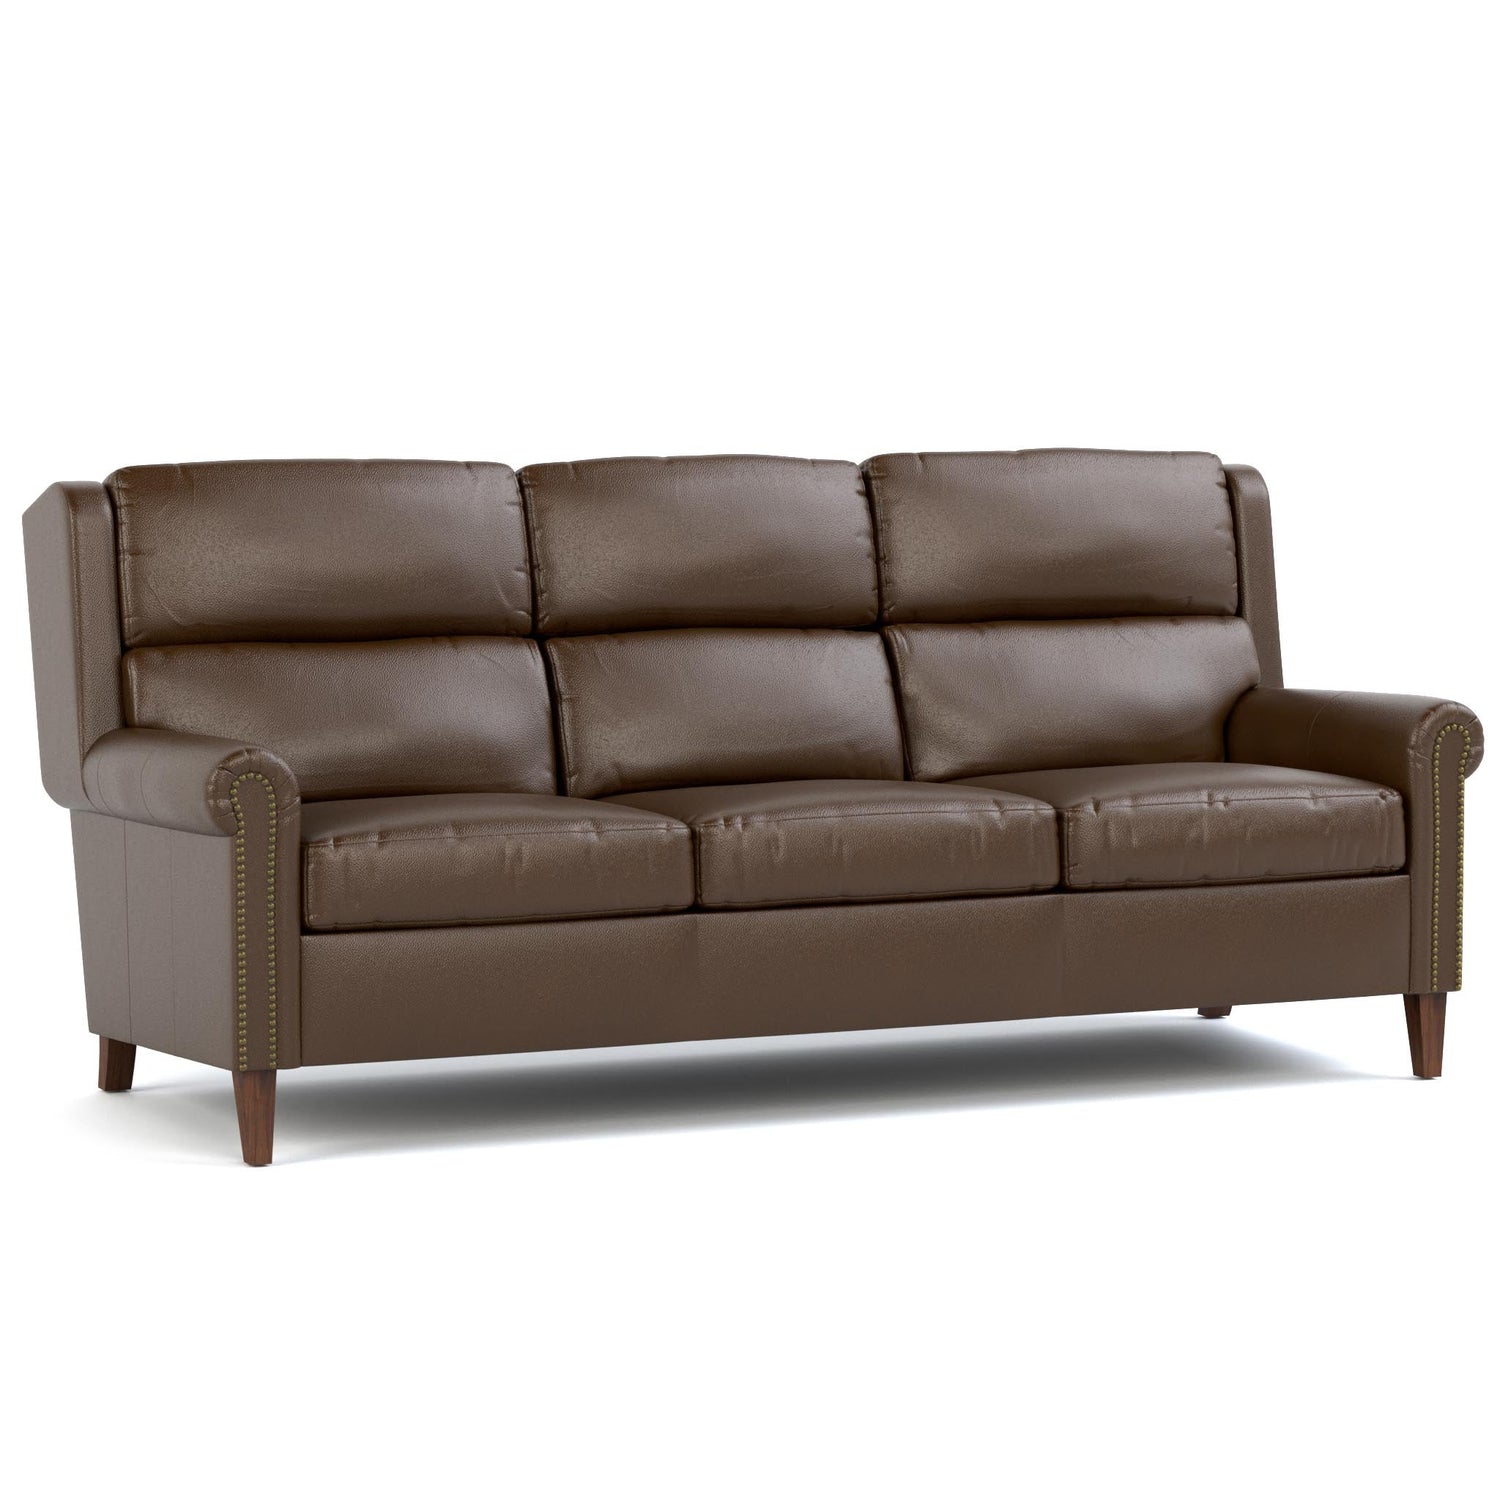 Woodlands Small Roll Arm Sofa with Nails Selvano Chestnut Program